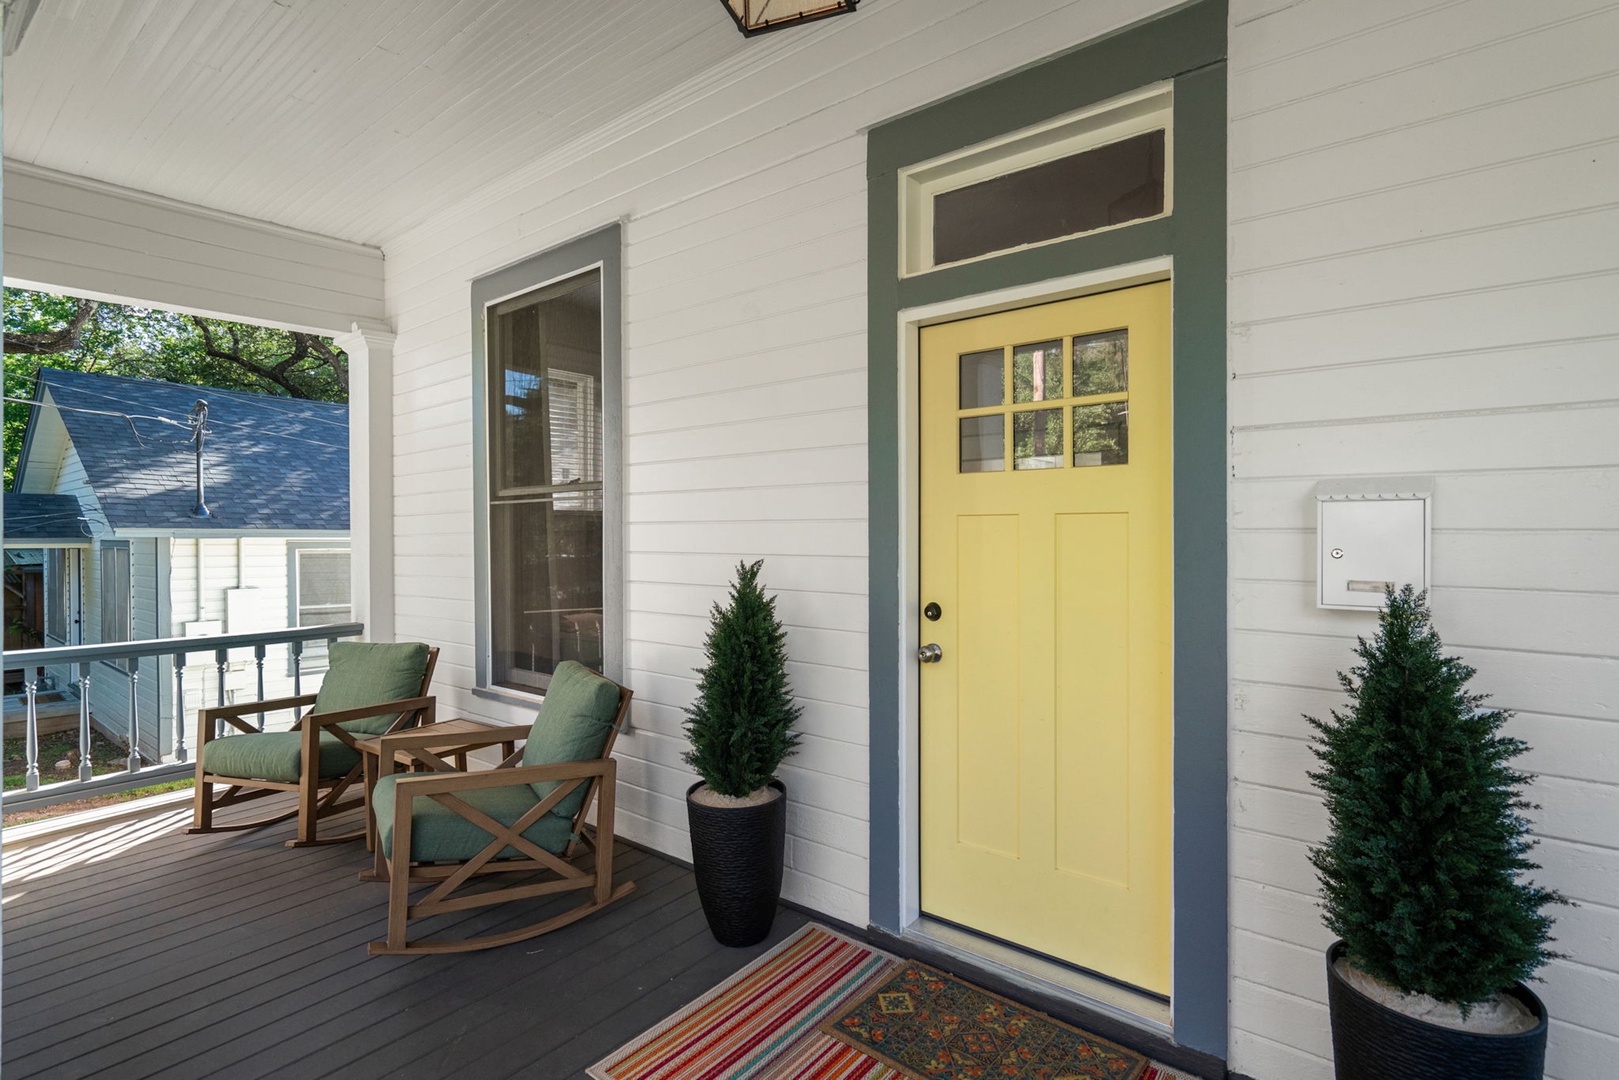 Relax & watch the world go by from the tranquil front porch